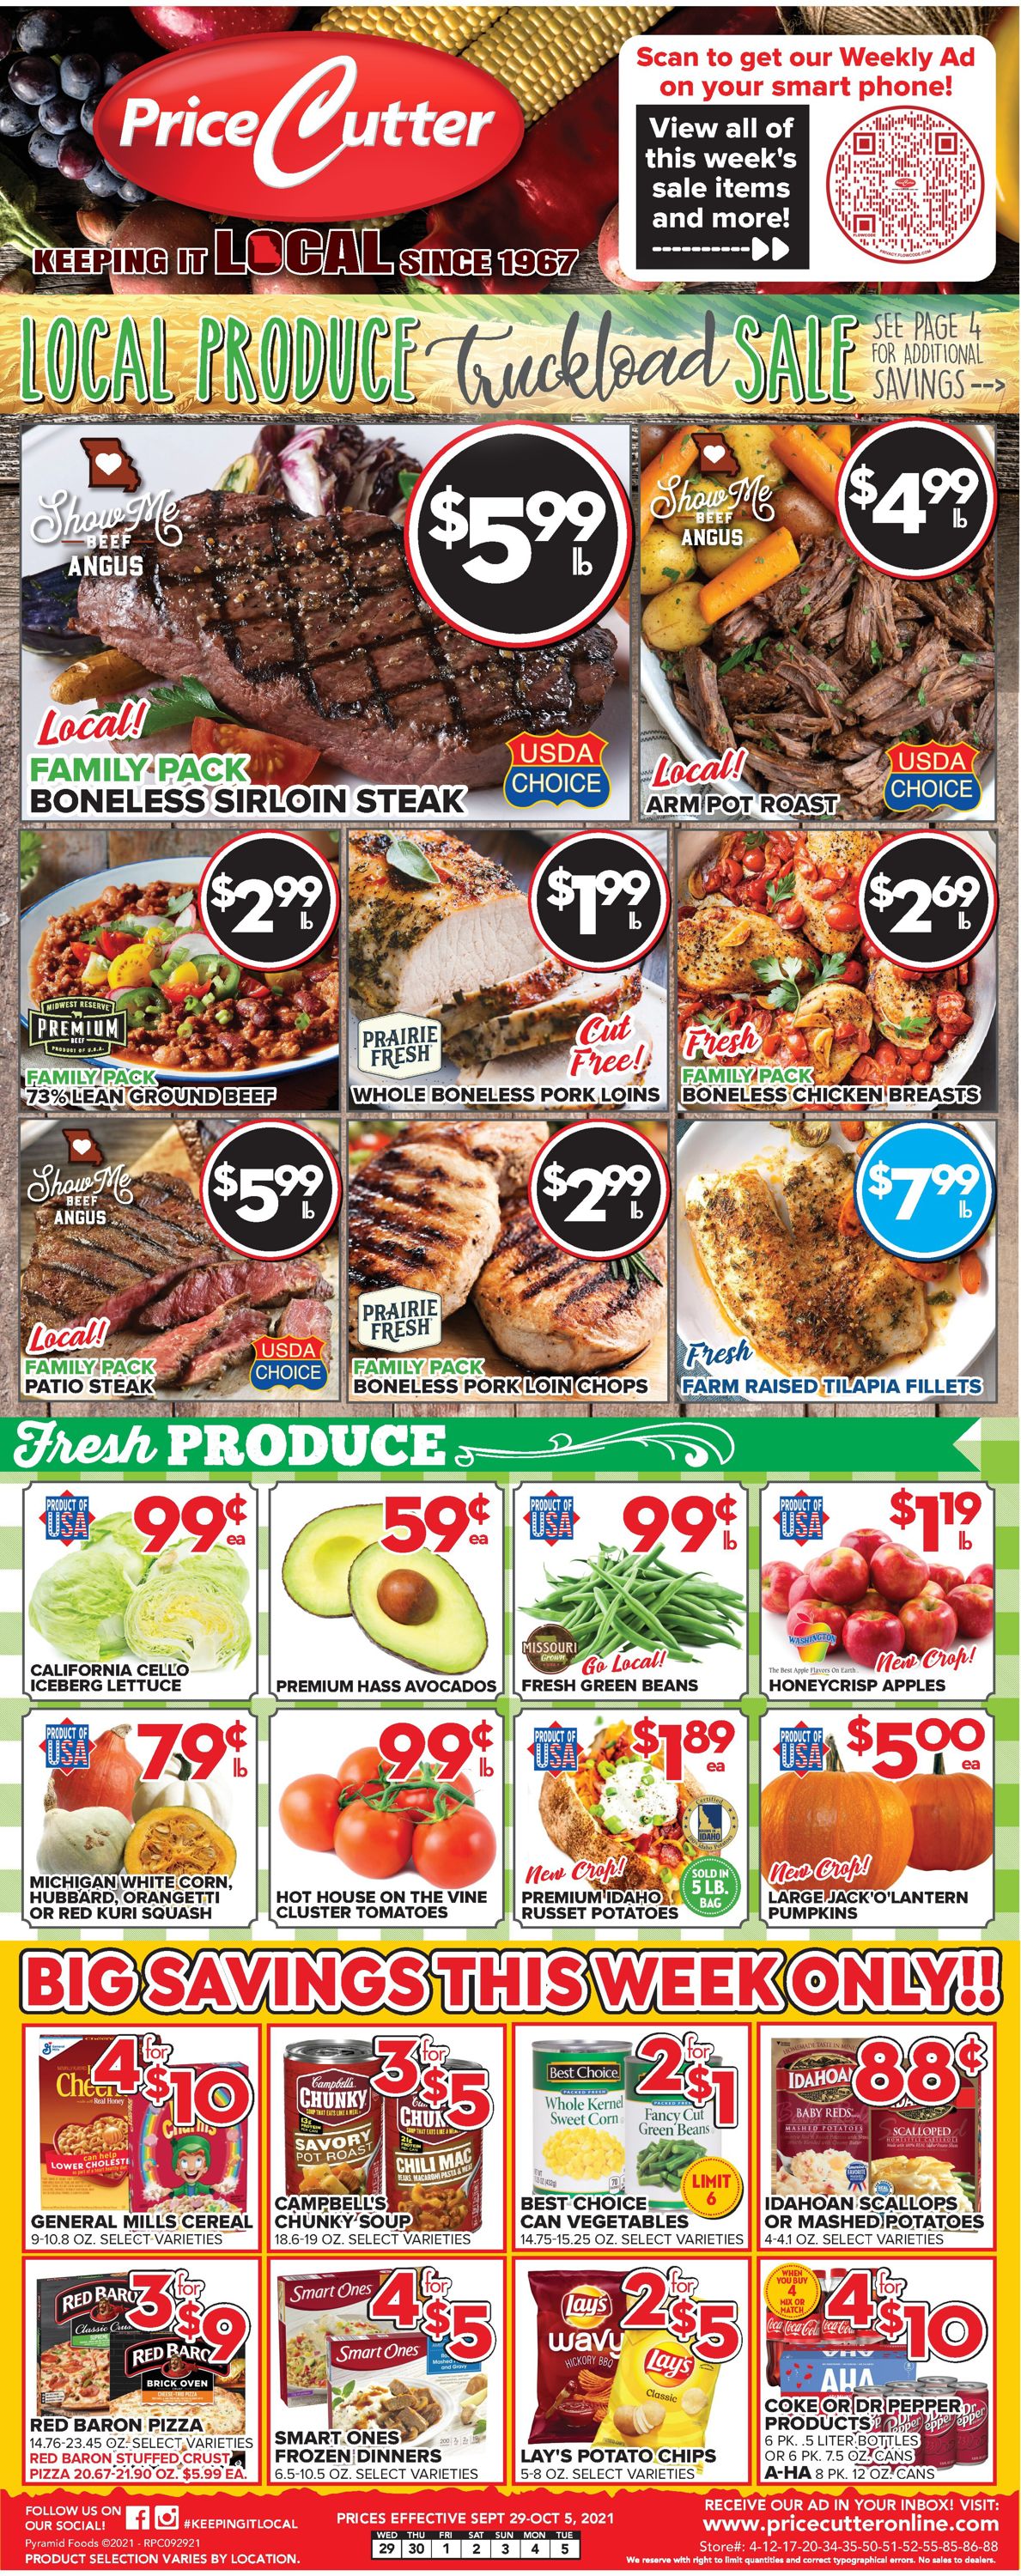 Price Cutter Weekly Ad Circular - valid 09/29-10/05/2021